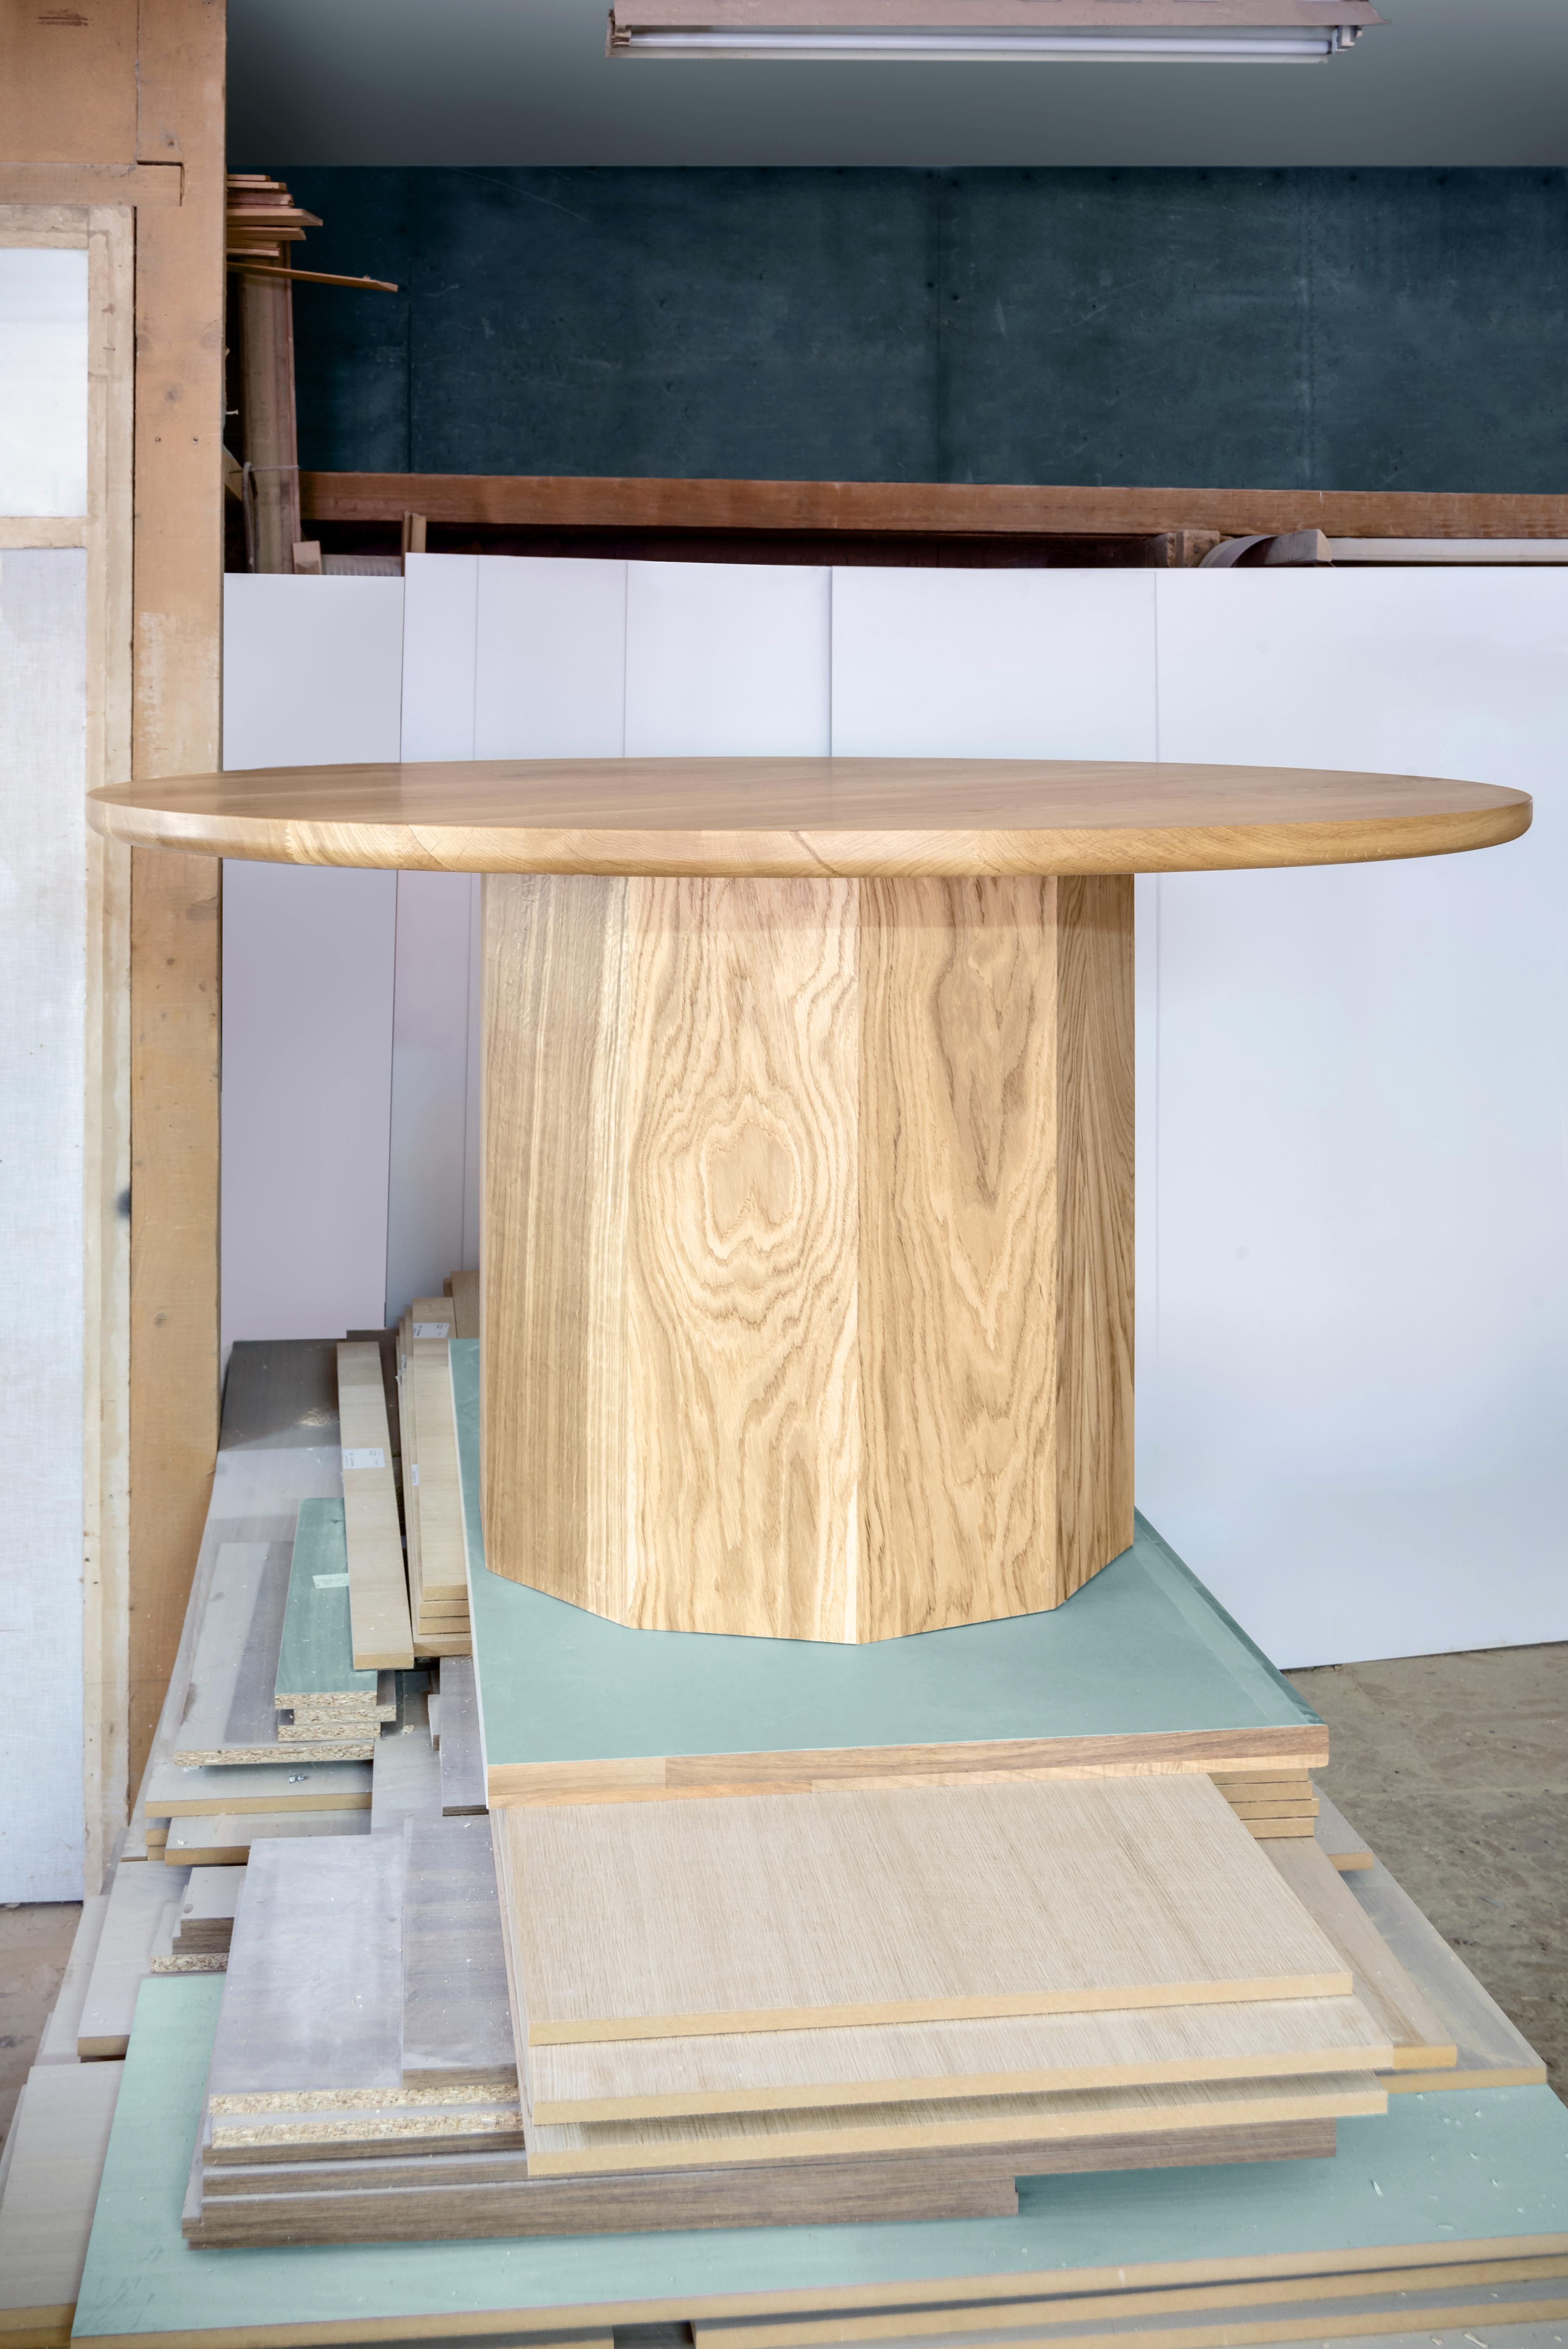 Oak dining table by Daniel Nikolovski
Dimensions: ø 150 x H 80 cm, Base: ø 65 cm
Materials: Massive oak
Also available in walnut.

Handmade from locally sourced oak wood, originating from the south of Macedonia, the OAK Series are defined by a bold